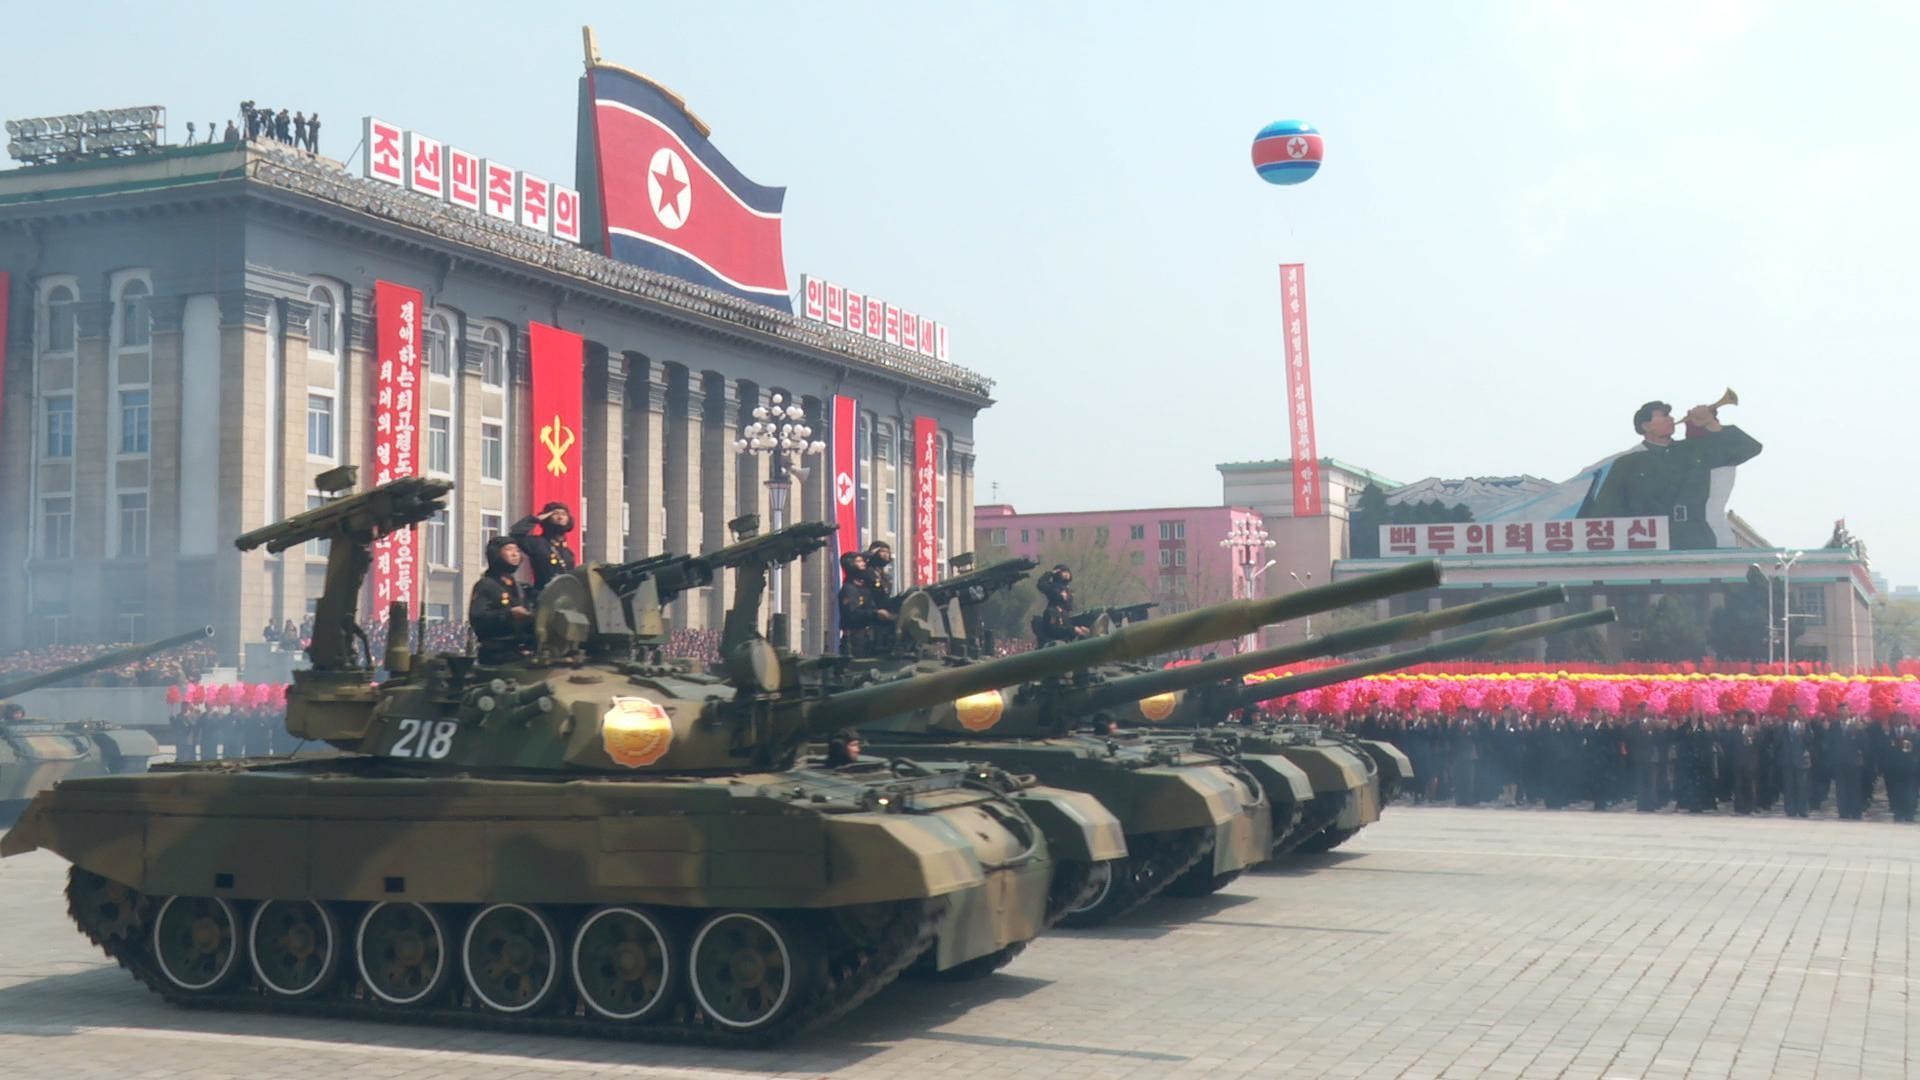 1920x1080 Military parade - Kim Jong Un's North Korea military spectacle - Pictures -  CBS News